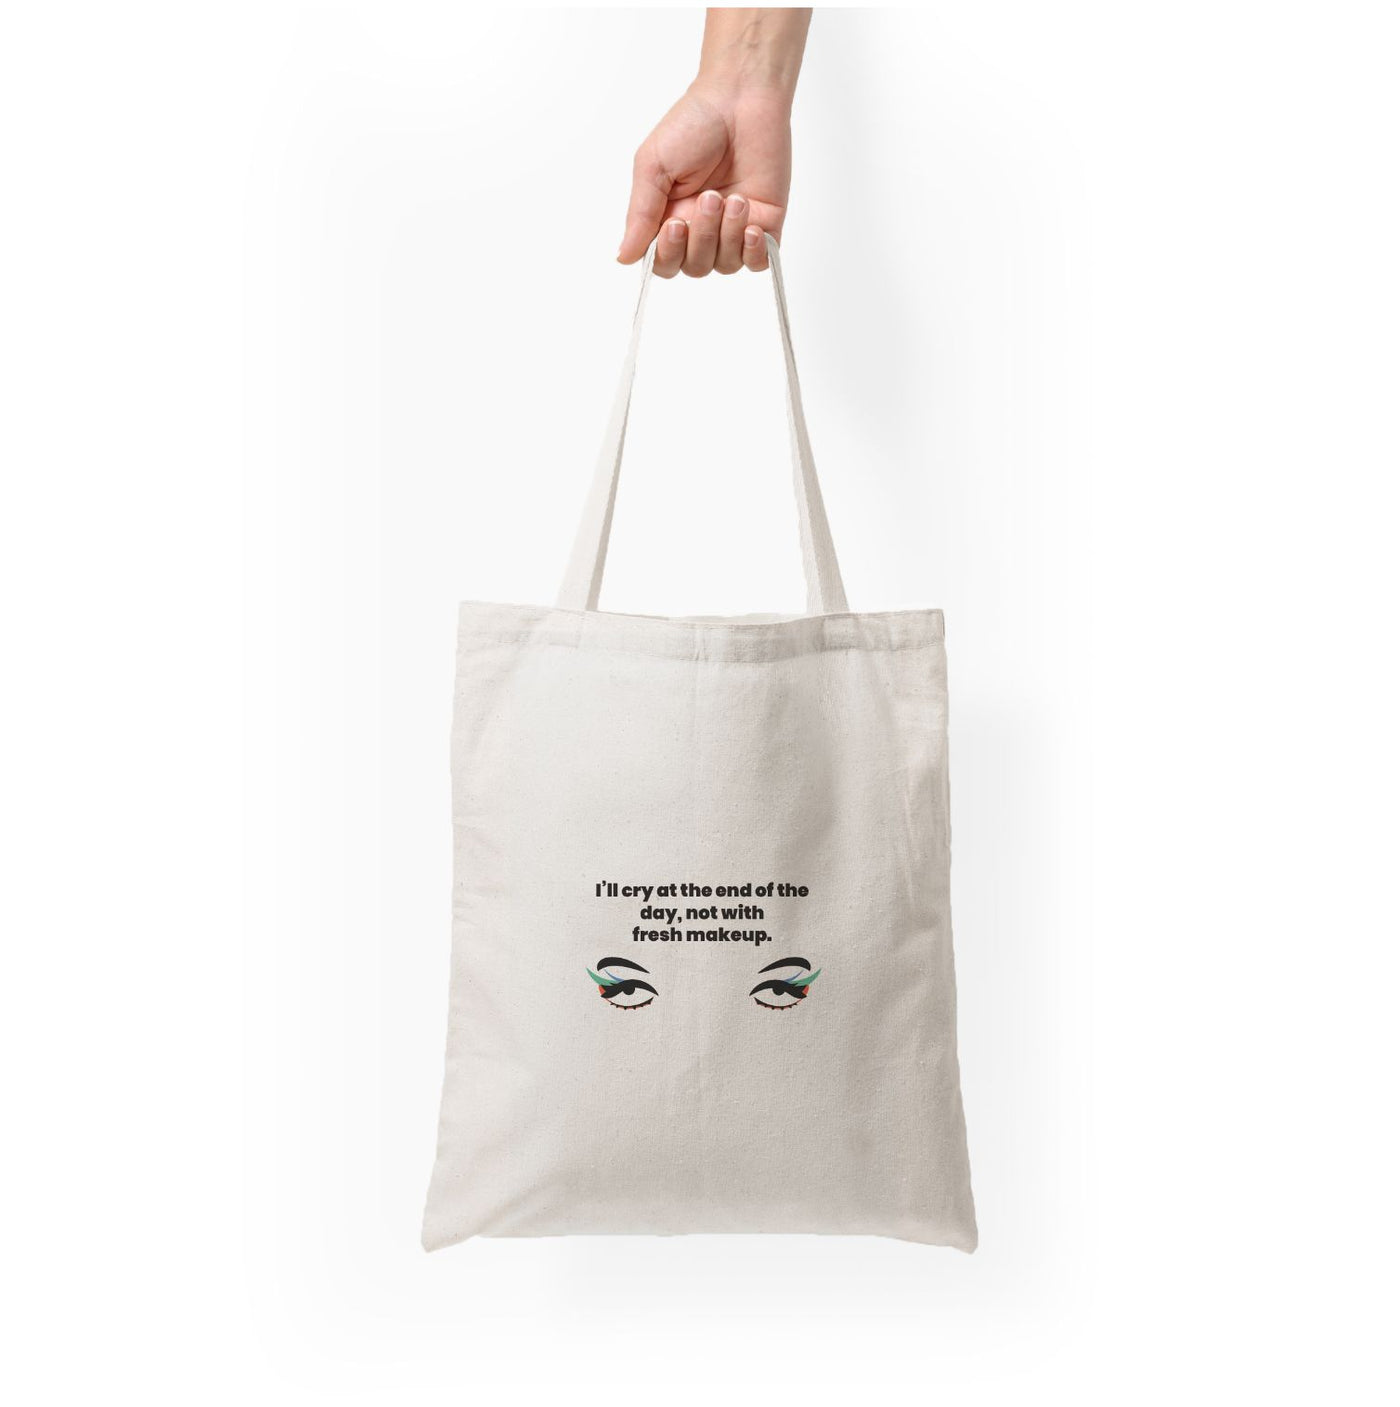 I'll cry at the end of the day - Kim Kardashian Tote Bag